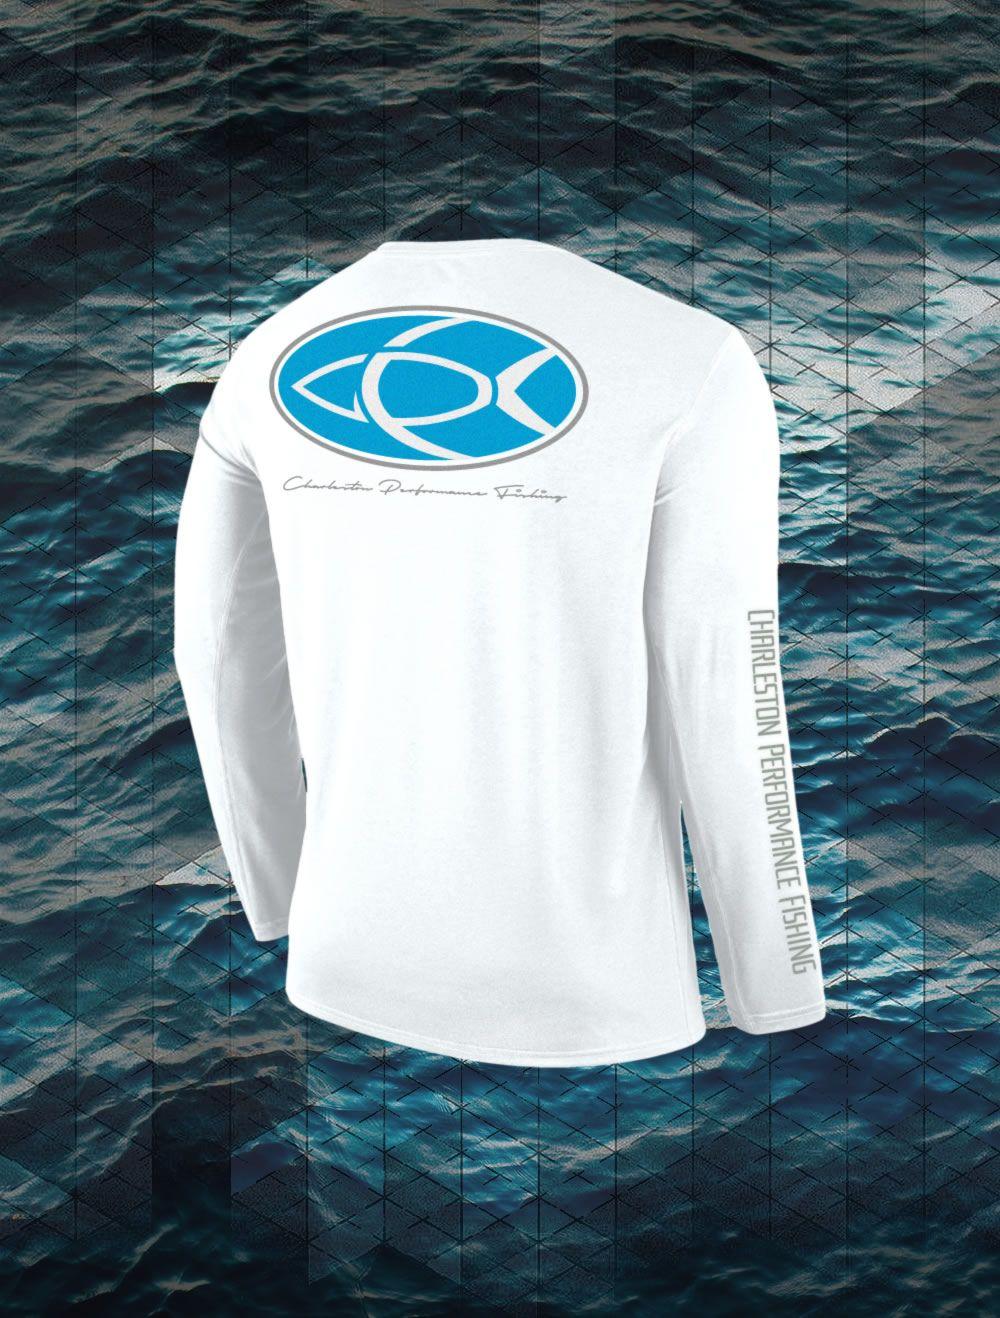 White and Blue Oval Logo - Oval Fish Back Blue Graphic White Long Sleeve Performance Fishing